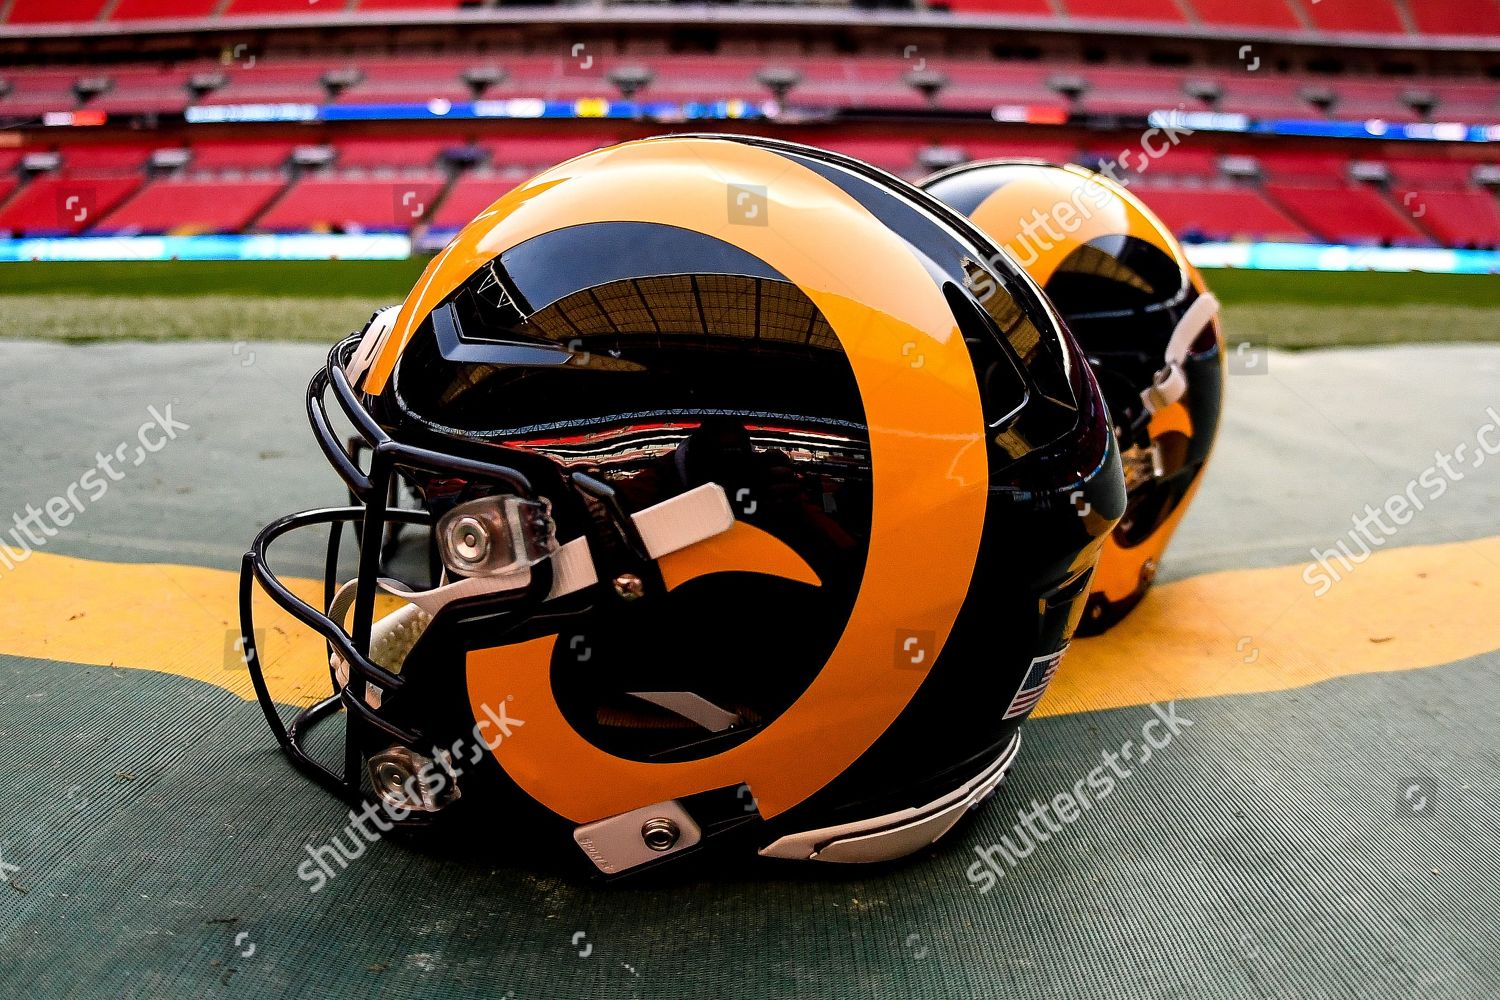 La Rams Helmet Pitch Side During Editorial Stock Photo - Stock Image